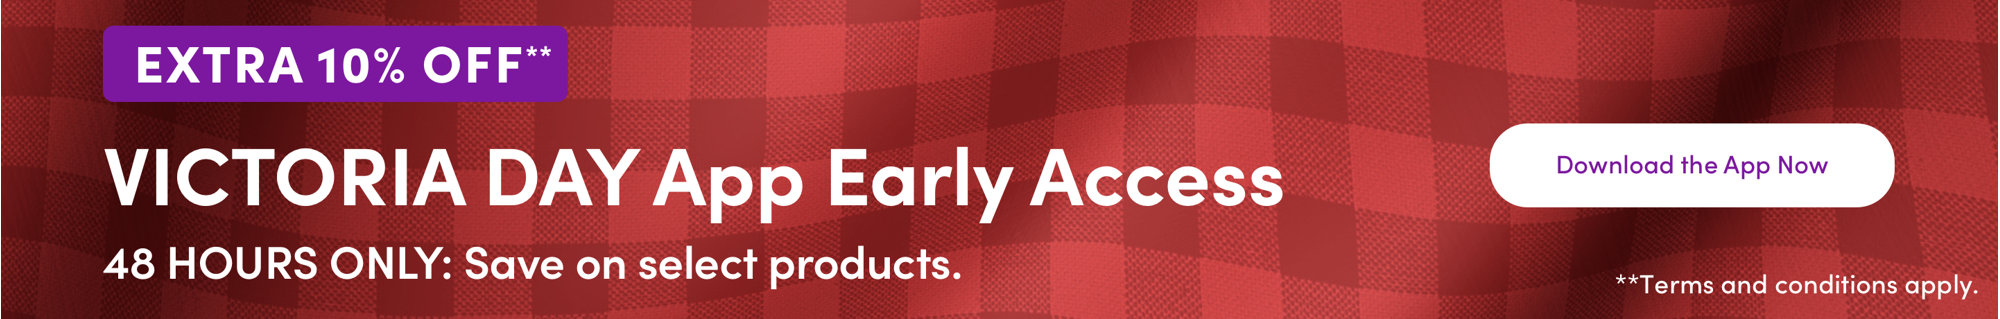 EXTRA 10% OFF** VICTORIA DAY App Early Access Download the App Now **Select products only. Terms and conditions apply.